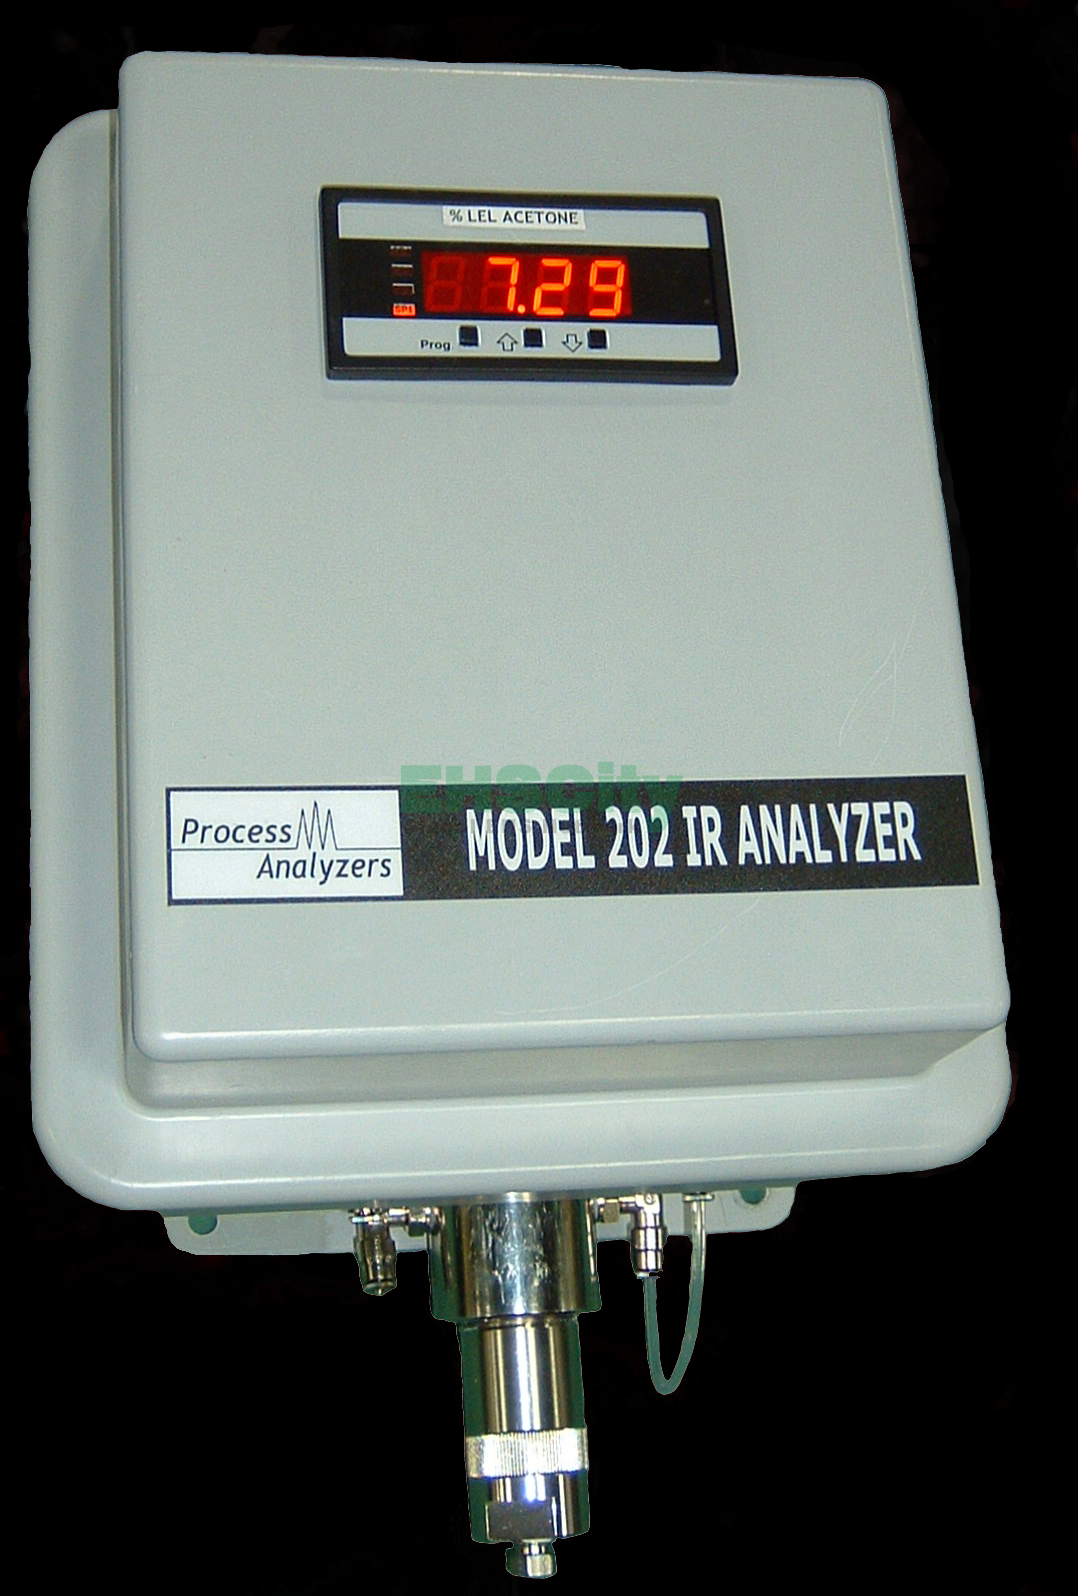 Model 202 Infrared Analyzer for LEL, Hydrocarbons, CH4, CO, CO2